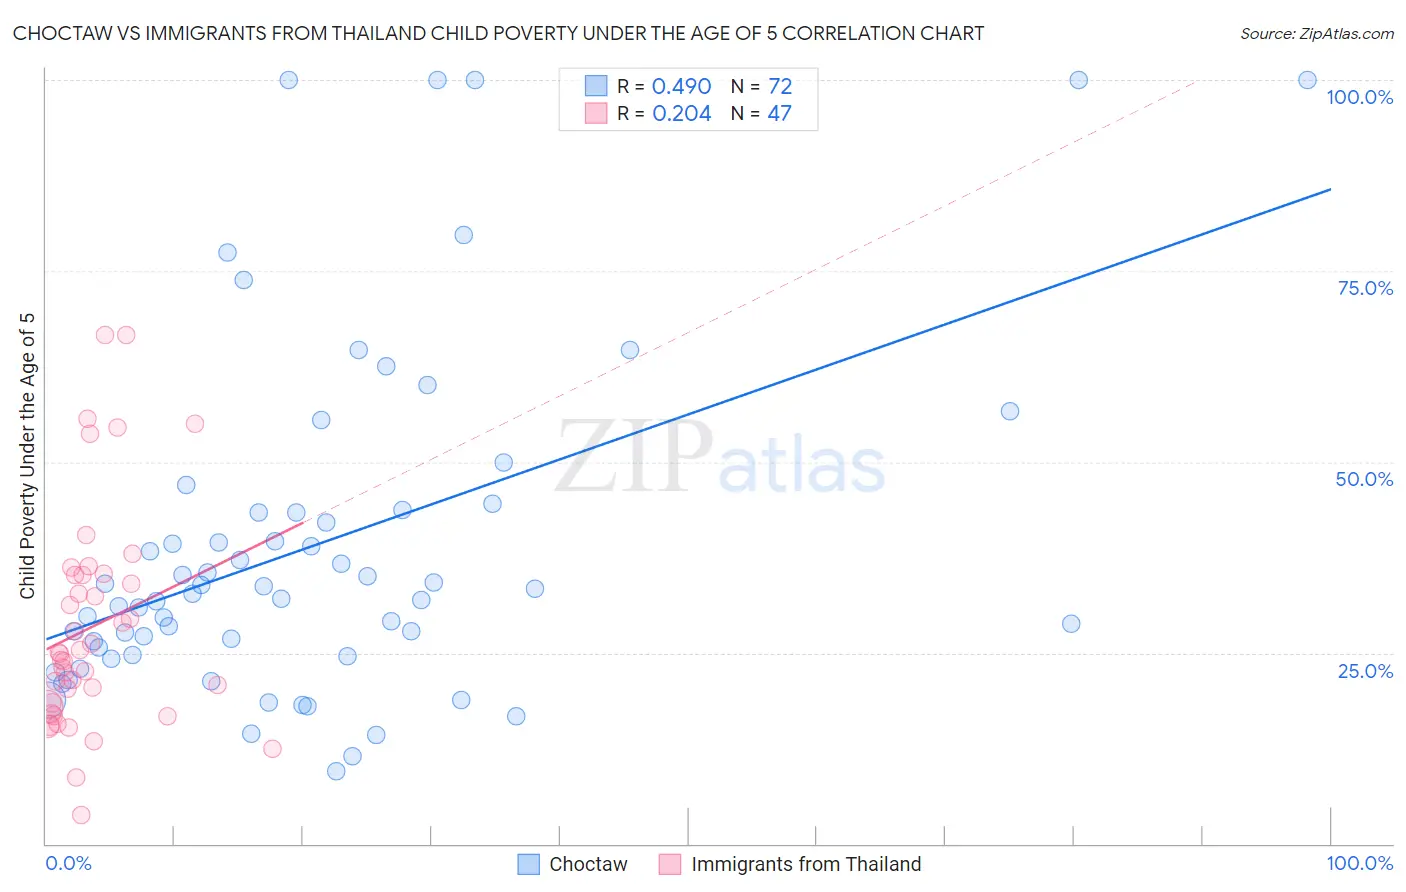 Choctaw vs Immigrants from Thailand Child Poverty Under the Age of 5